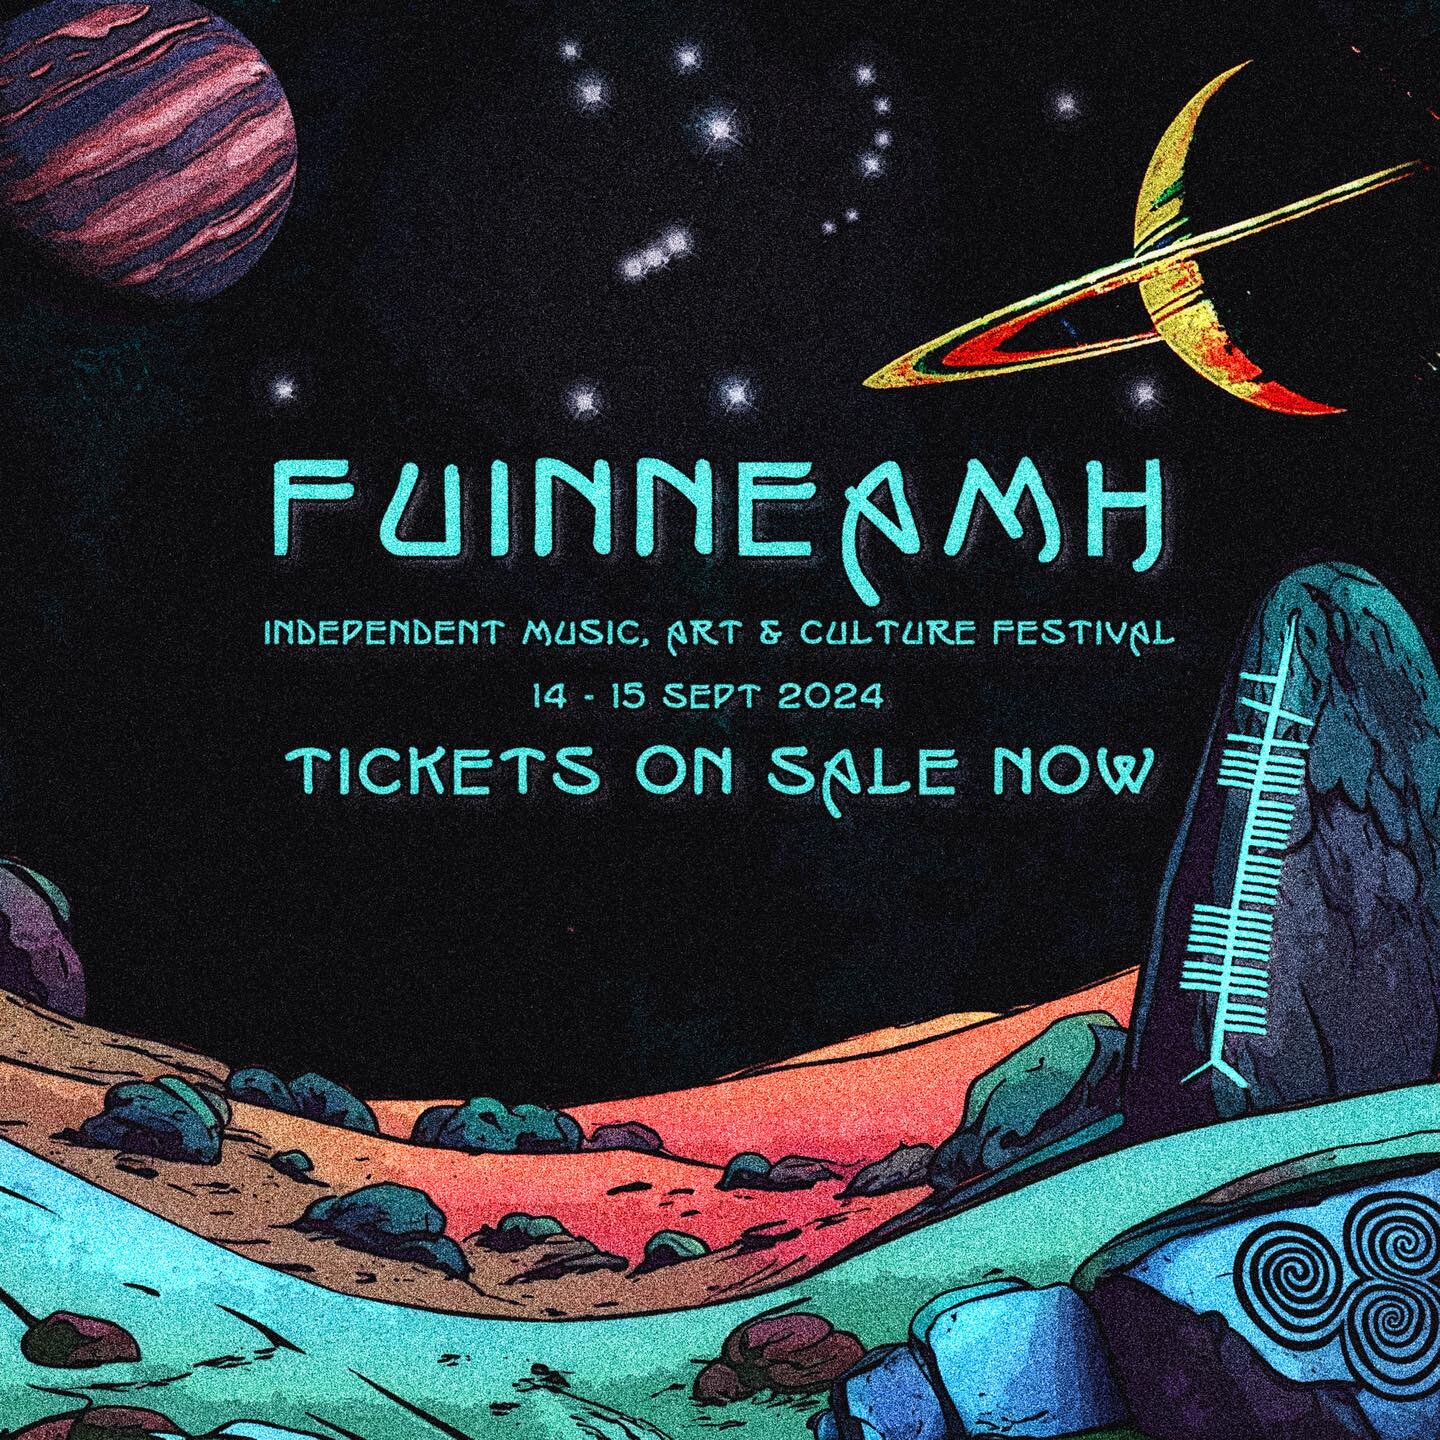 General sale tickets are now live!! Link in bio! 
🪐🌌
This years theme &ldquo;THE COSMOS&rdquo; - The cosmos has always been a driving force of inspiration for us at Fuinneamh, the beauty of the vast expanse, the stars, planets, galaxies and nebulas